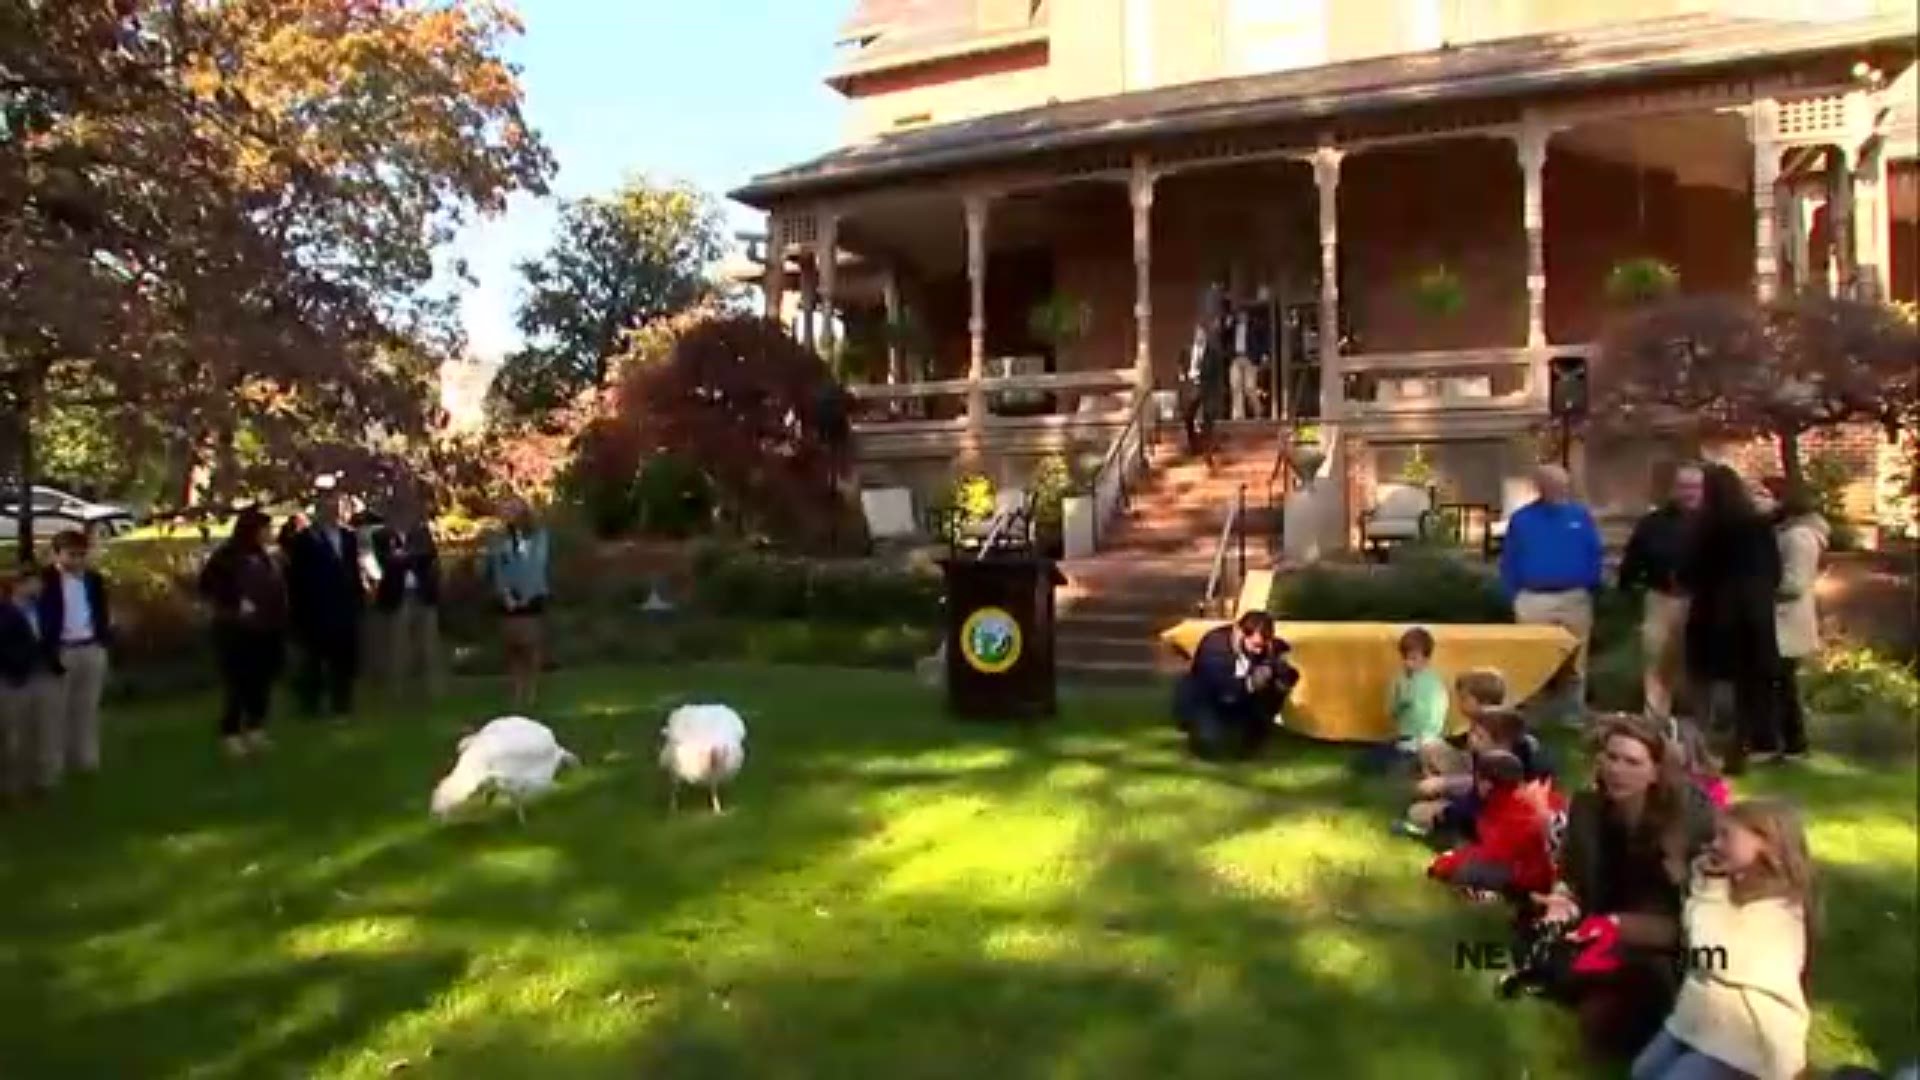 NC Governor Roy Cooper has pardoned Wilbur and Orville. The turkeys will live out their days at the Naylor Family Farm in Fuquay-Varina. Courtesy: WTVD